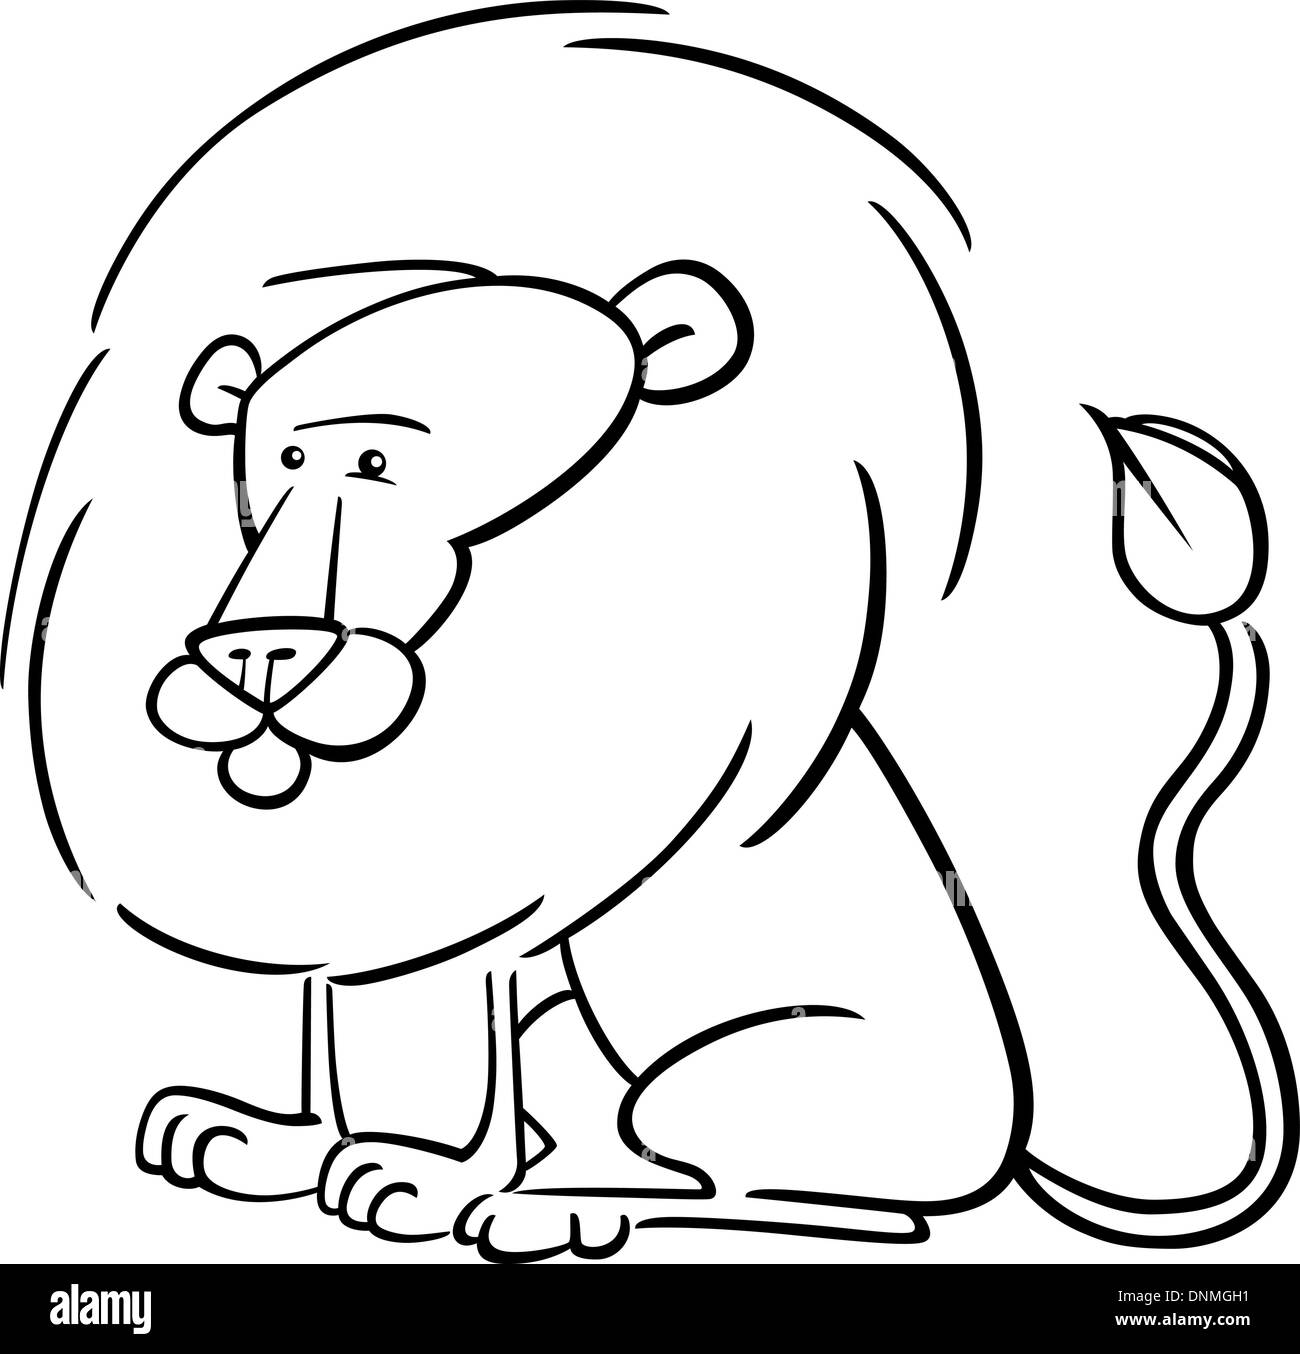 Cartoon Illustration of Cute African Lion for Coloring Book Stock ...